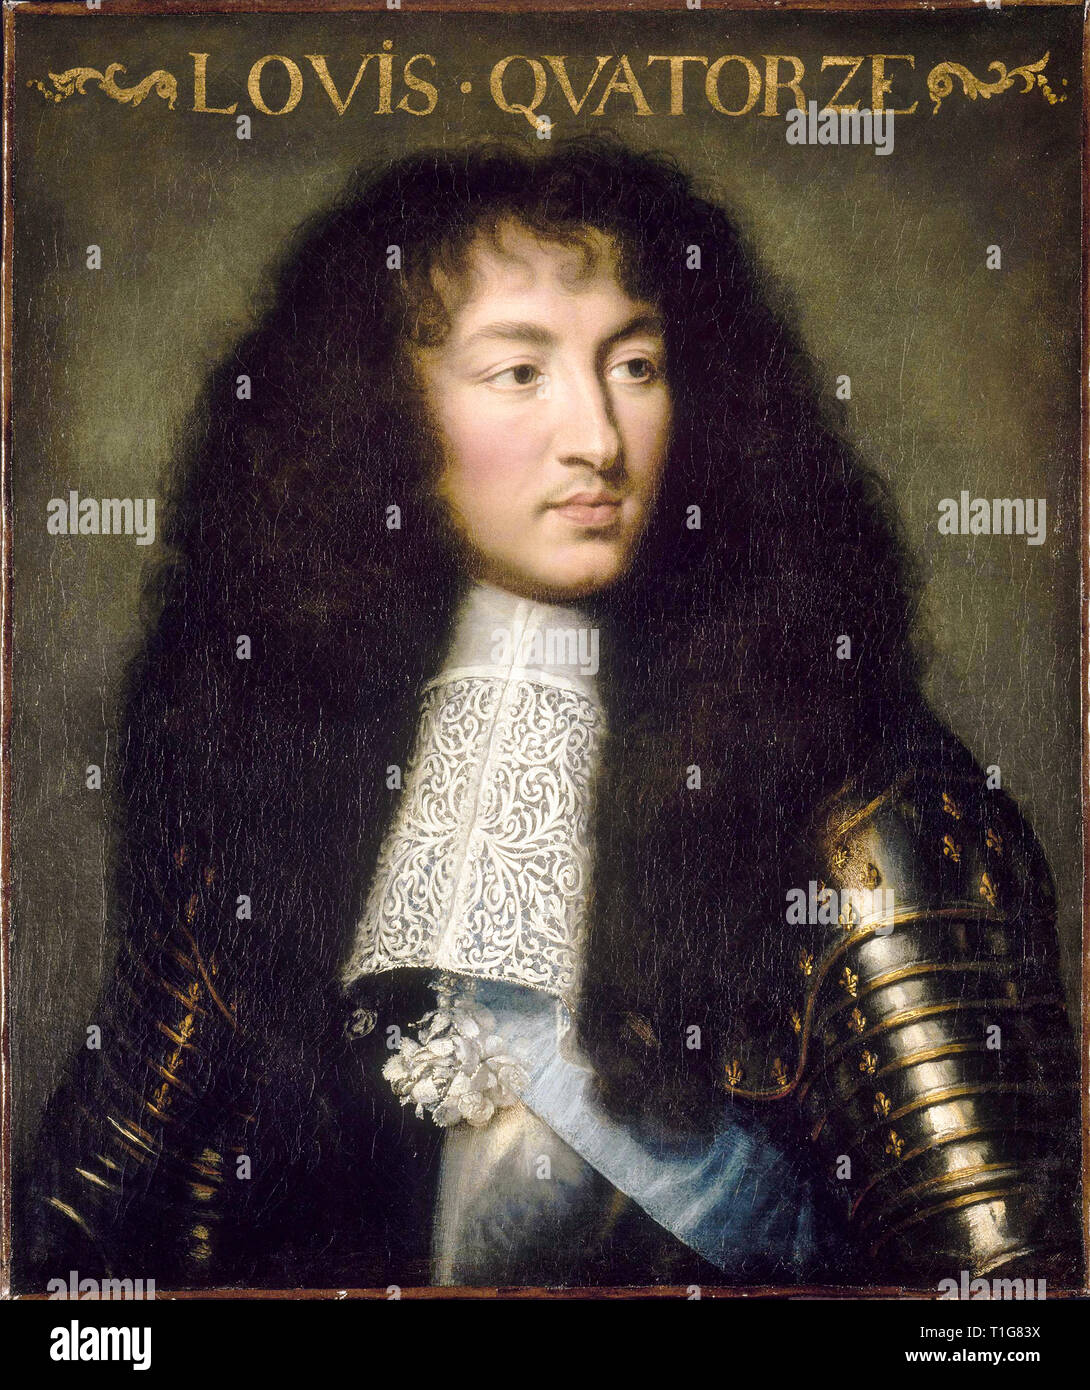 Louis XIV, King of France and Navarre (1638-1715), portrait painting, Charles Le Brun, c. 1662 Stock Photo